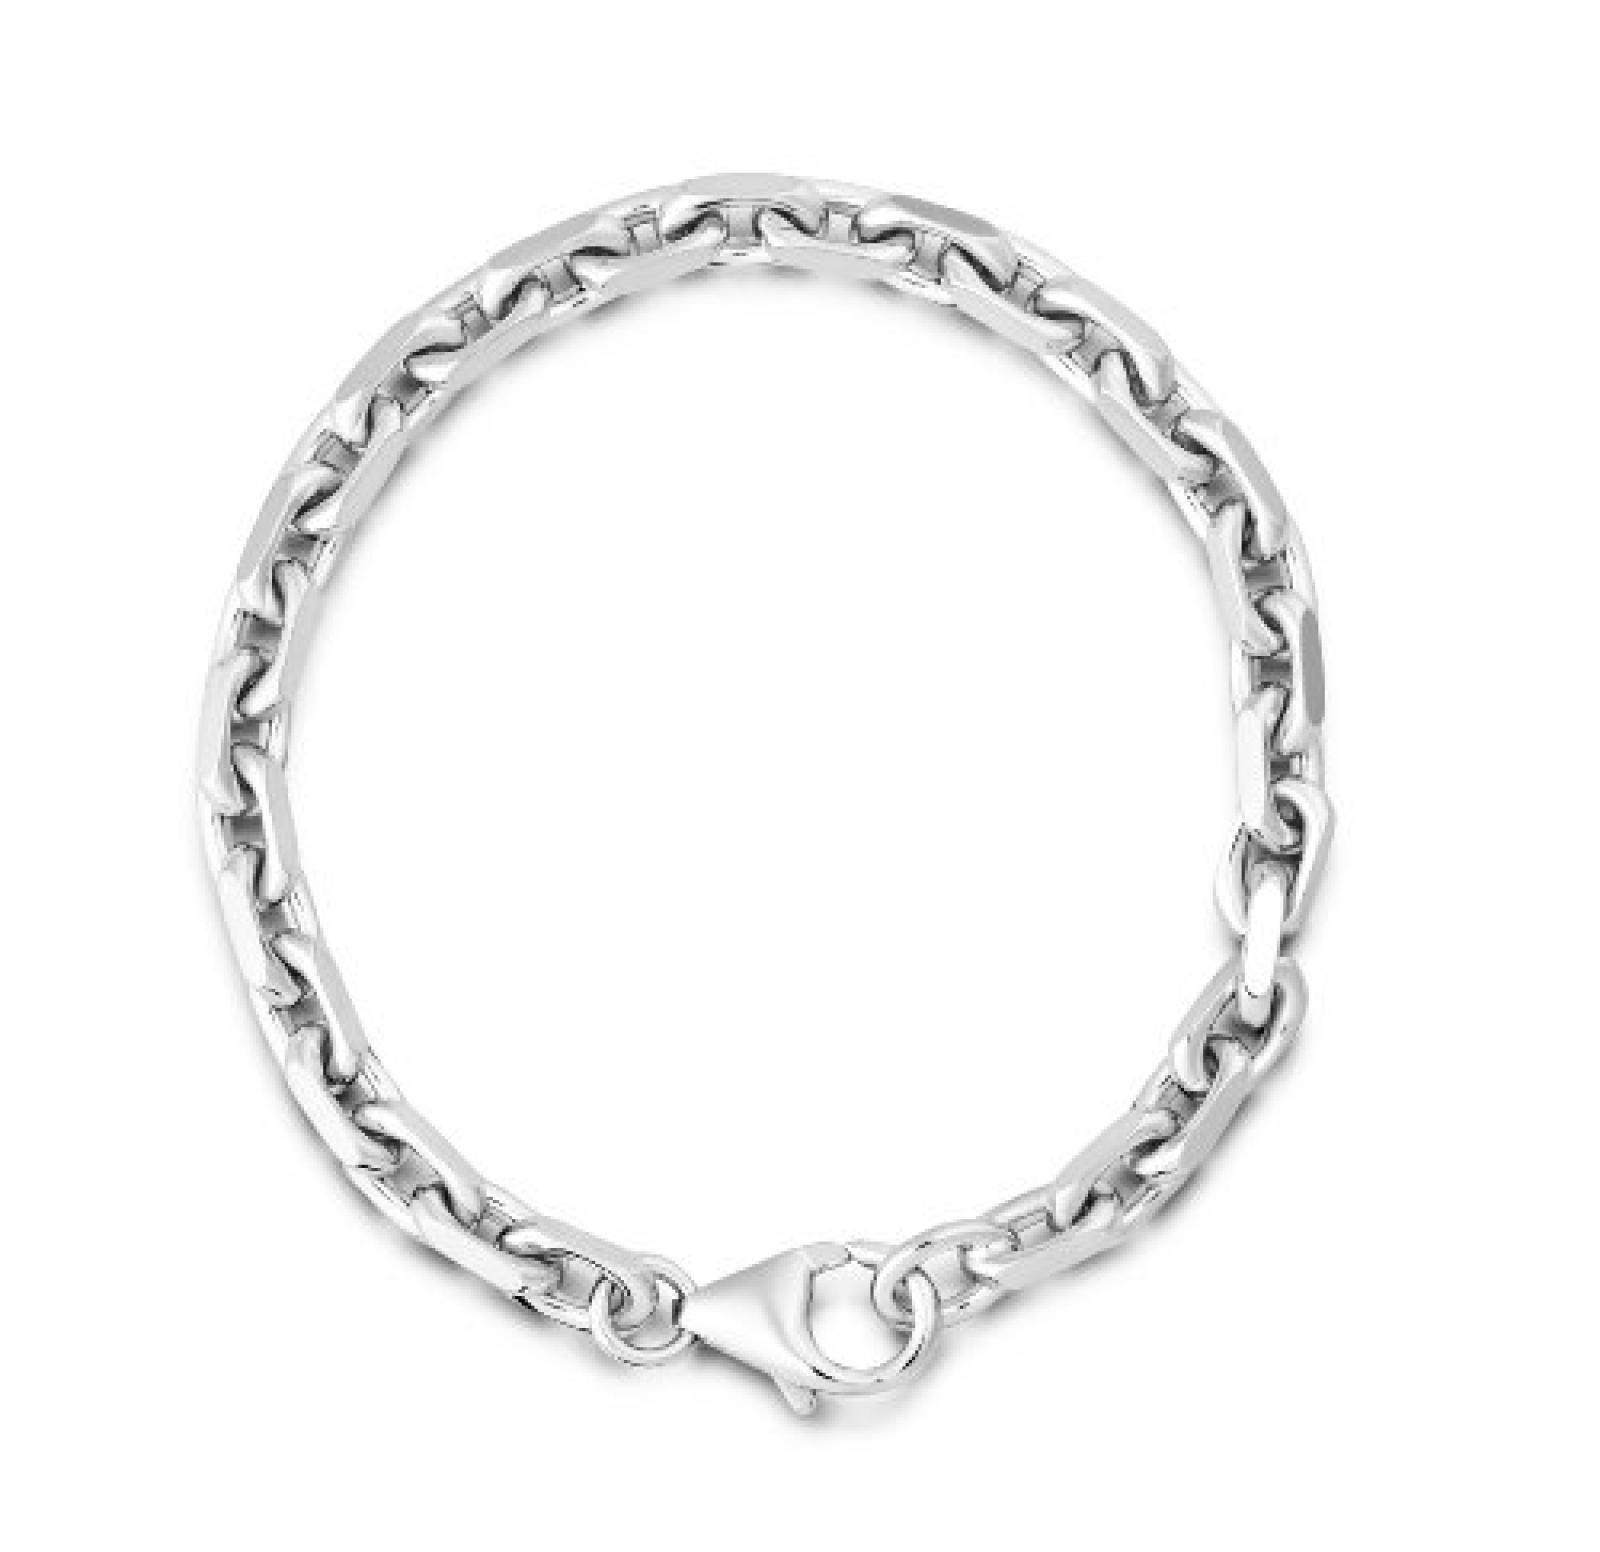 Miore Damen-Armband 925 Sterling Silber 19cm MBS003B 